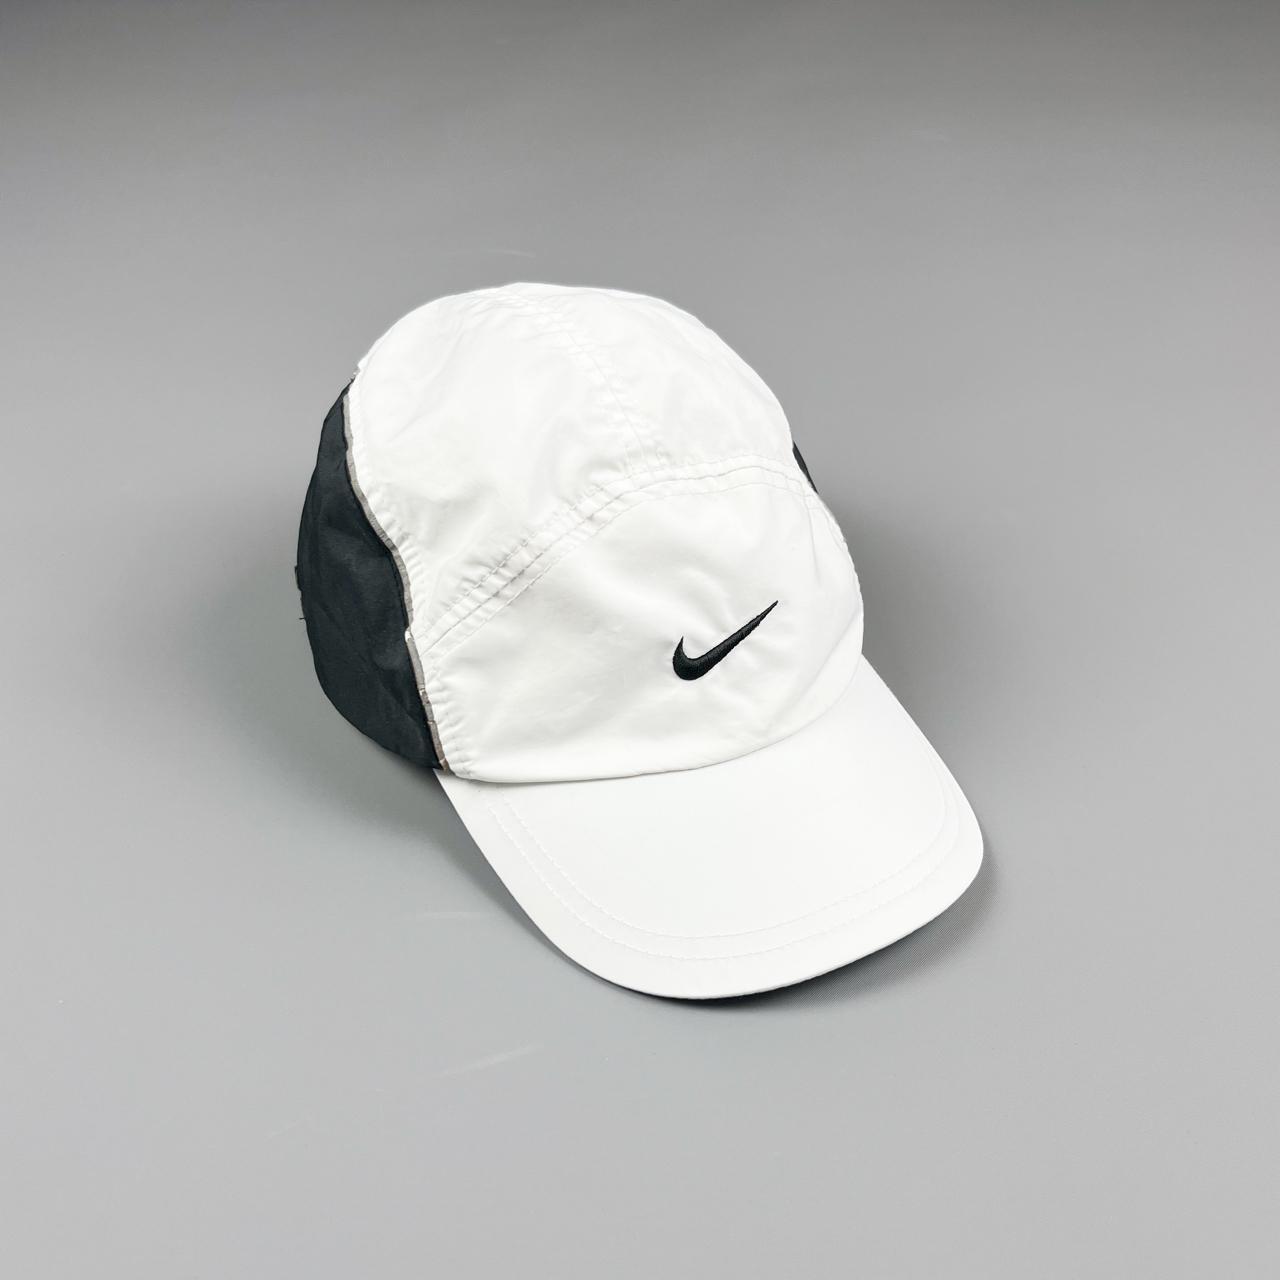 Nike Clima-fit Cap The shape we all know and... - Depop